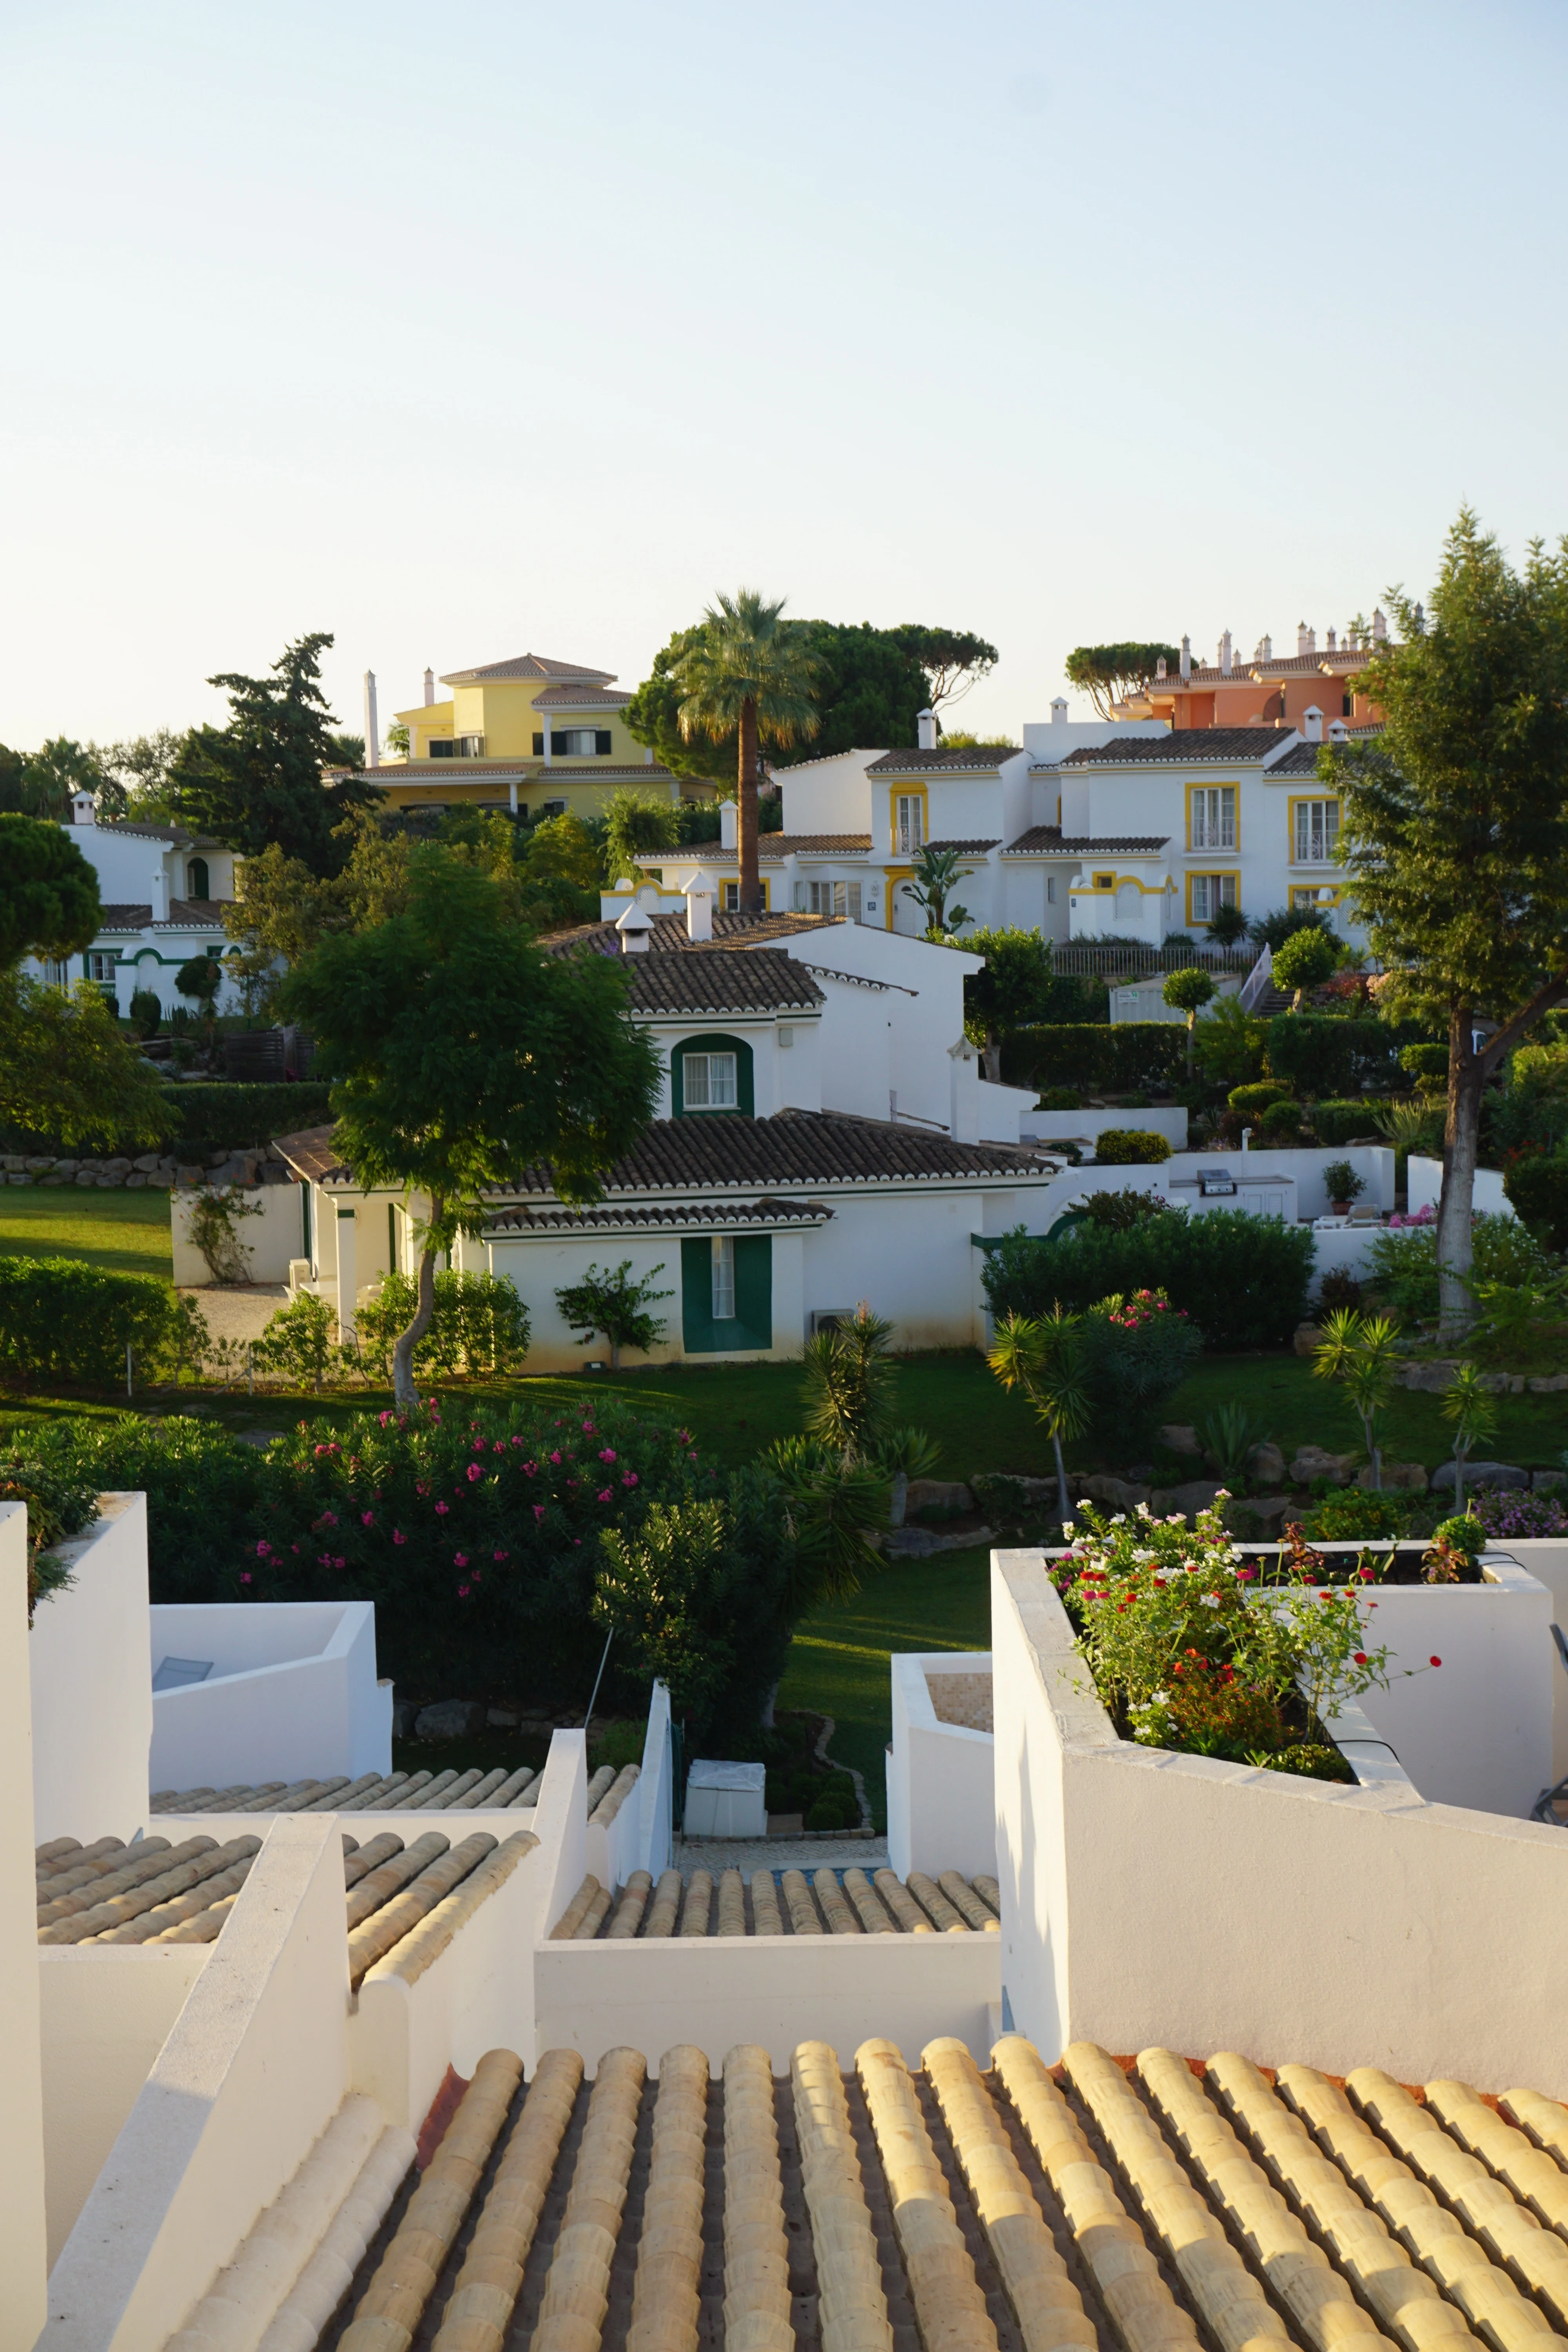 View from our terrace at the Four Seasons Fairways, the best luxury villa resort in the Algarve, Portugal